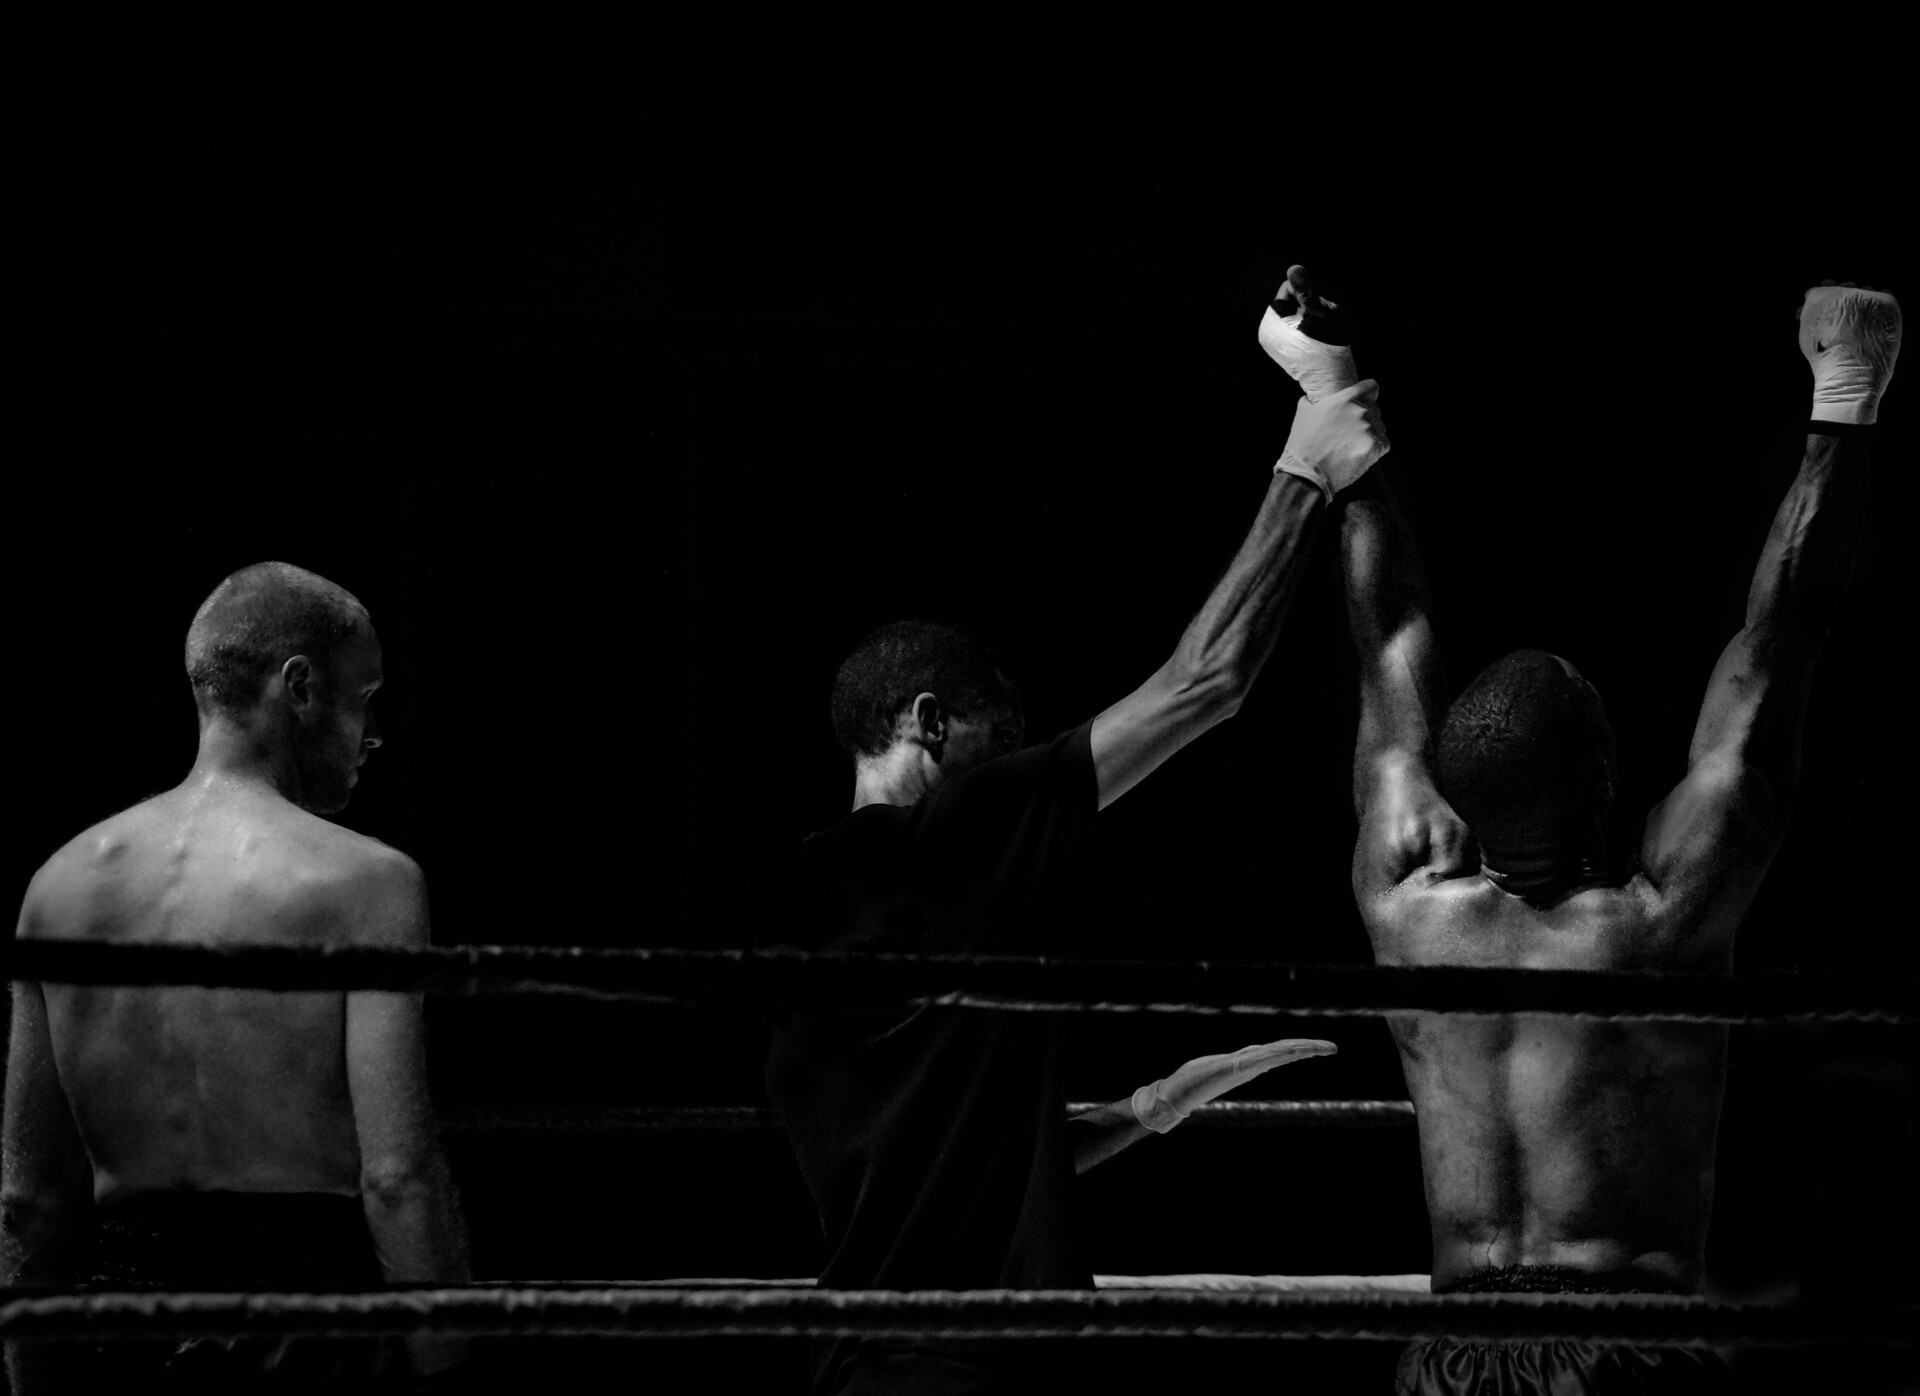 A monochrome image capturing two pugilists in the ring demonstrates your unique approach.